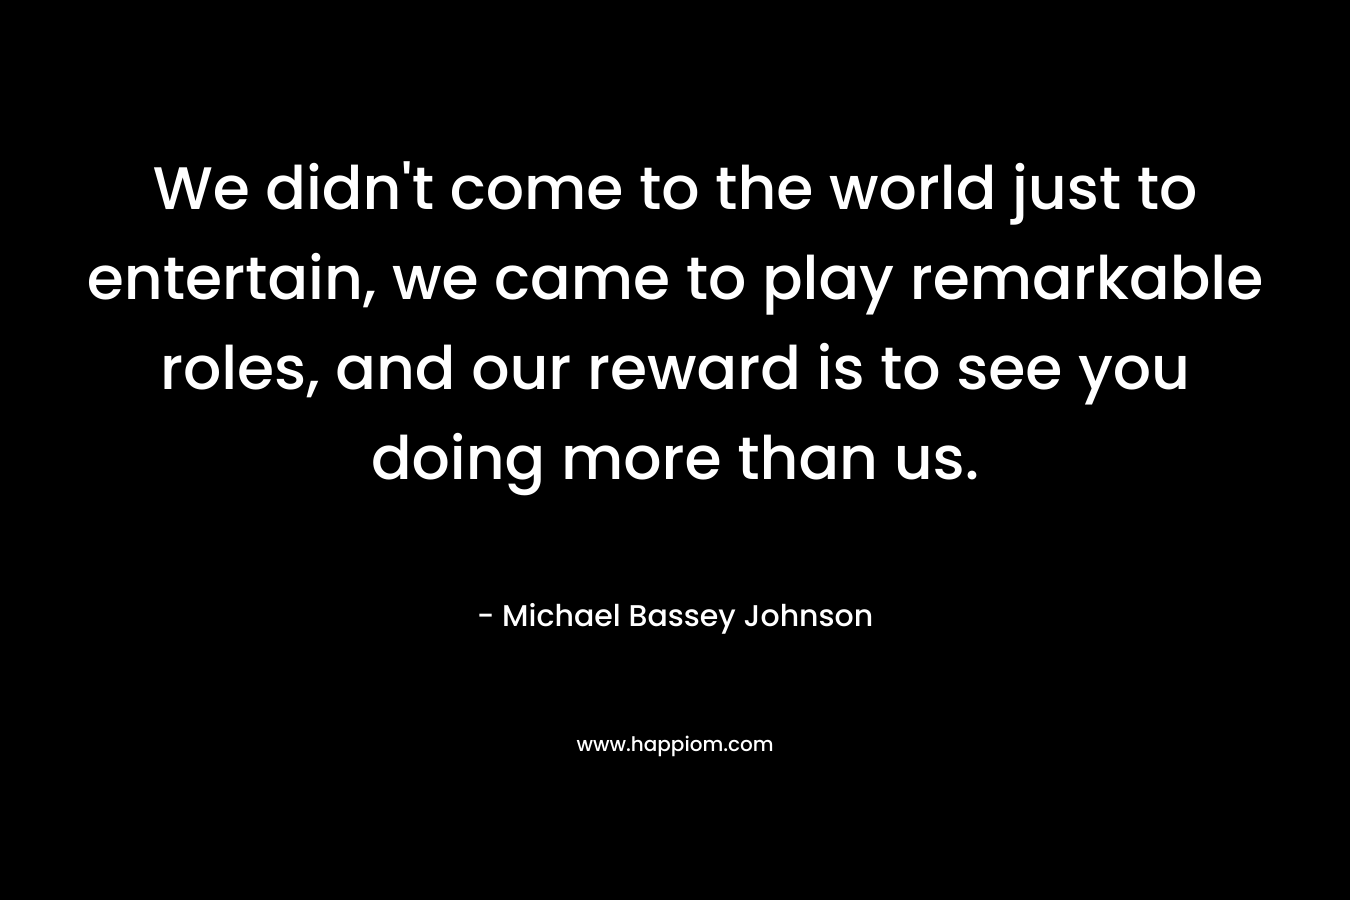 We didn’t come to the world just to entertain, we came to play remarkable roles, and our reward is to see you doing more than us. – Michael Bassey Johnson